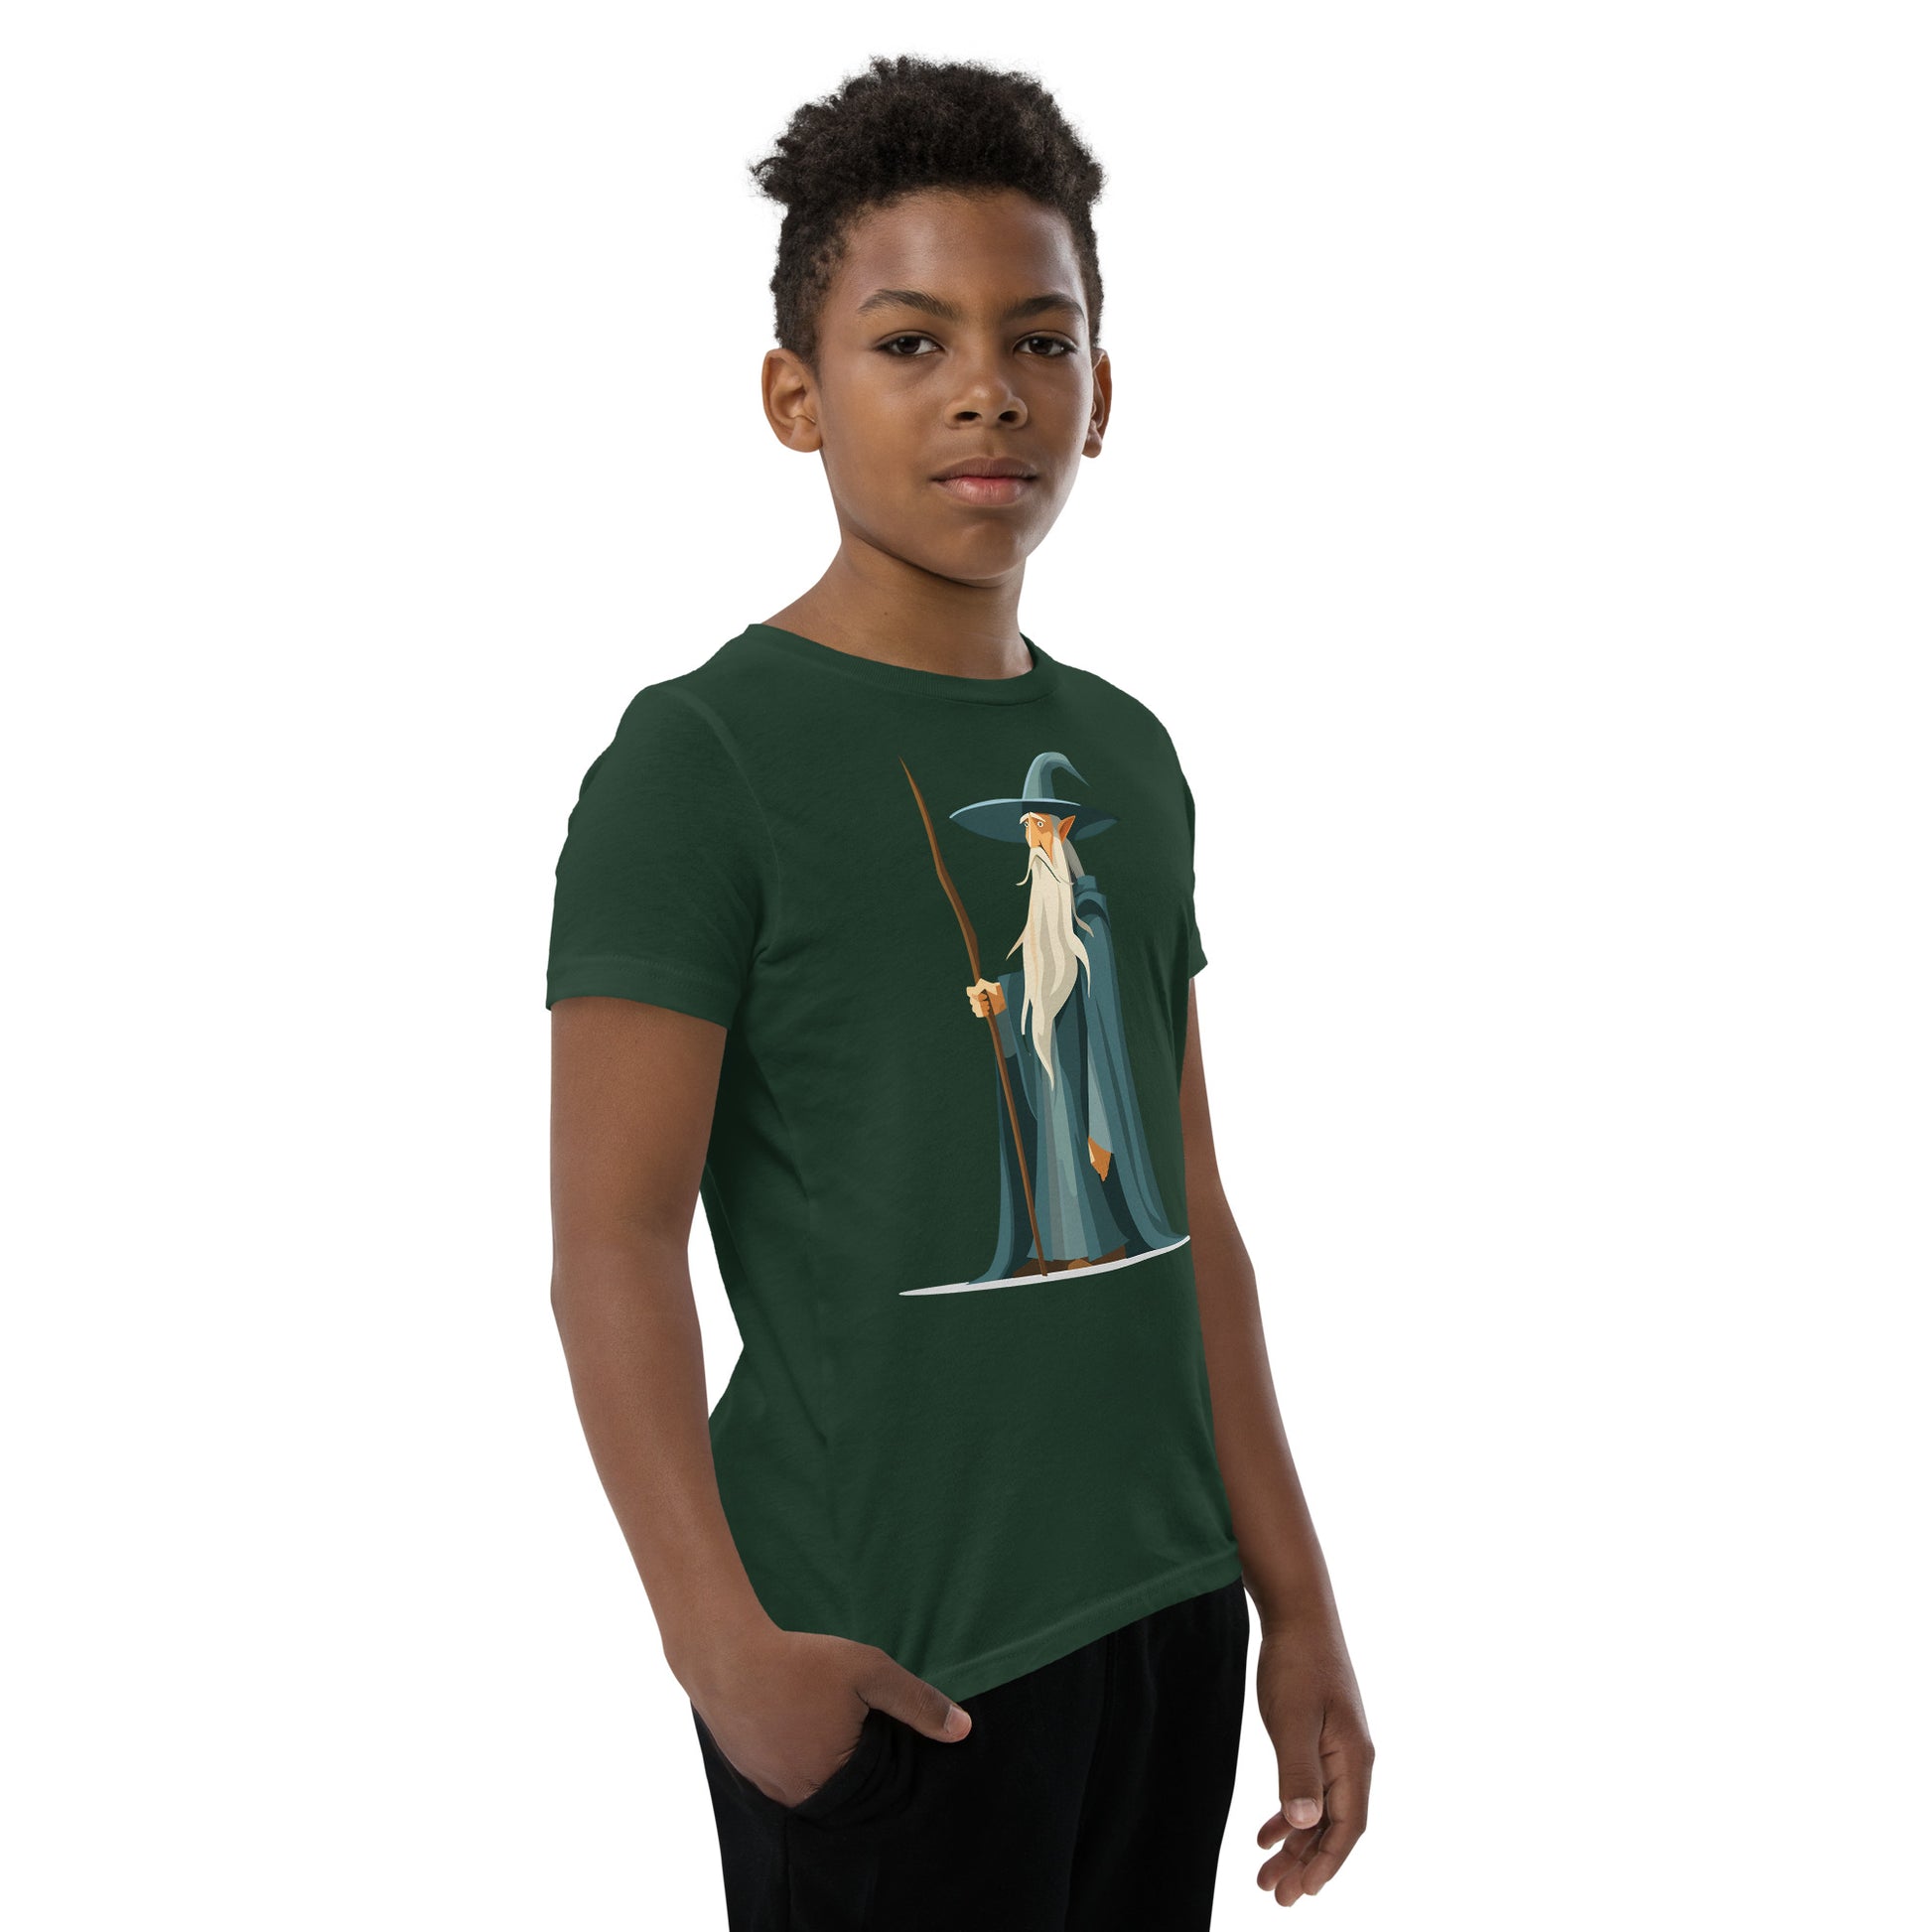 Boy with a forest green T-shirt with a picture of a magician